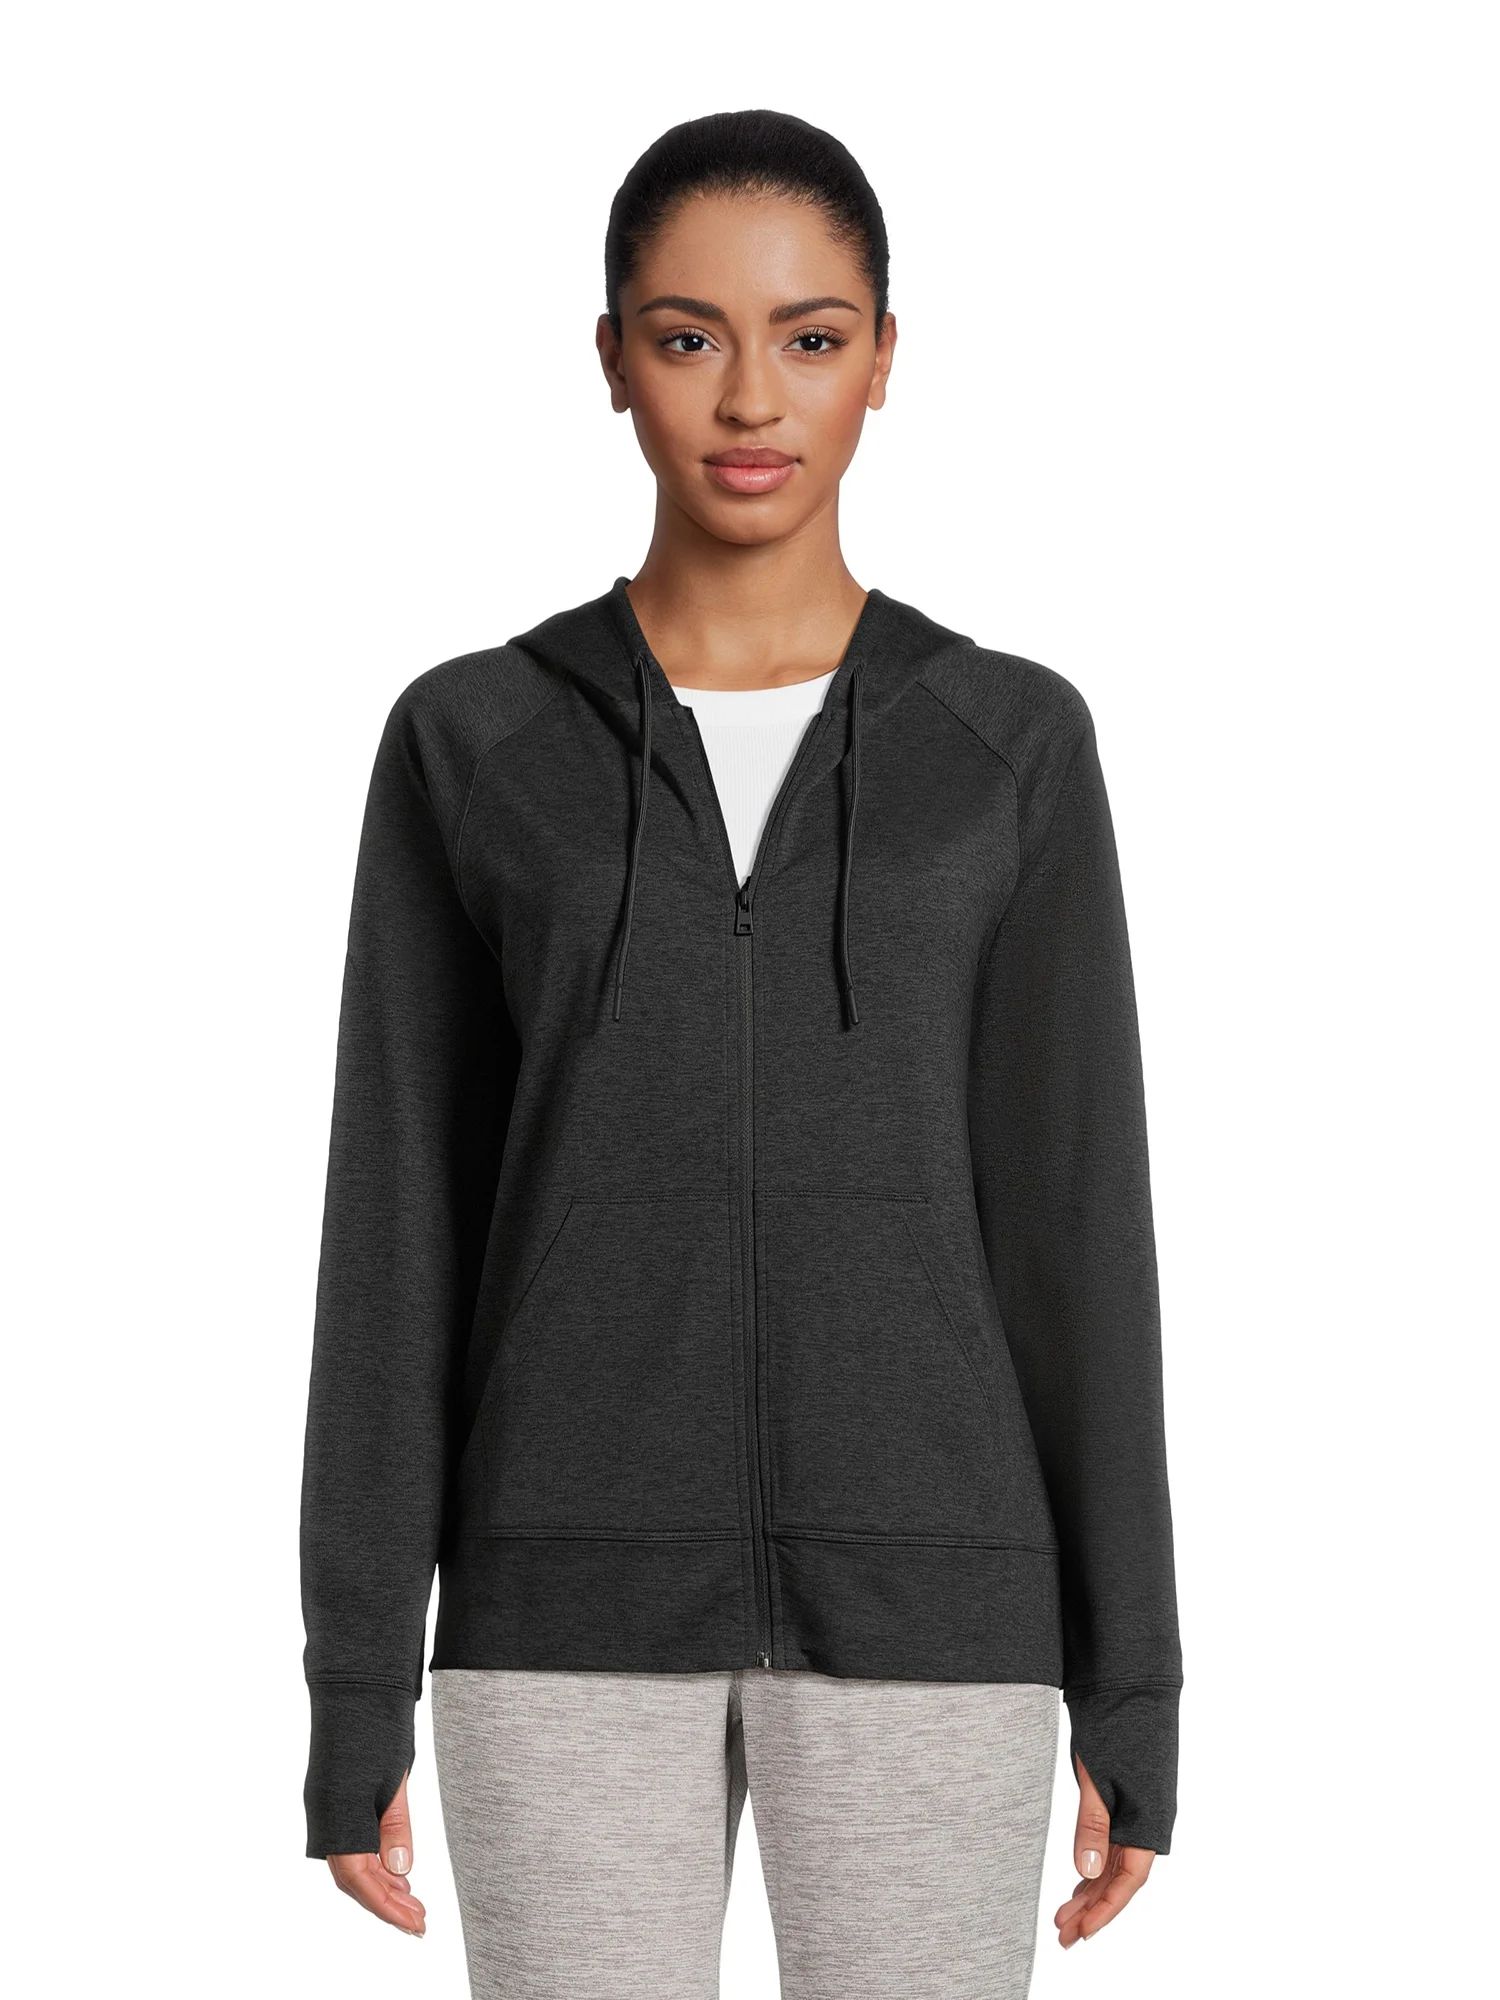 Athletic Works Women’s and Women's Plus Buttery Soft Lightweight Zip-Up Hoodie, Sizes XS-4X | Walmart (US)